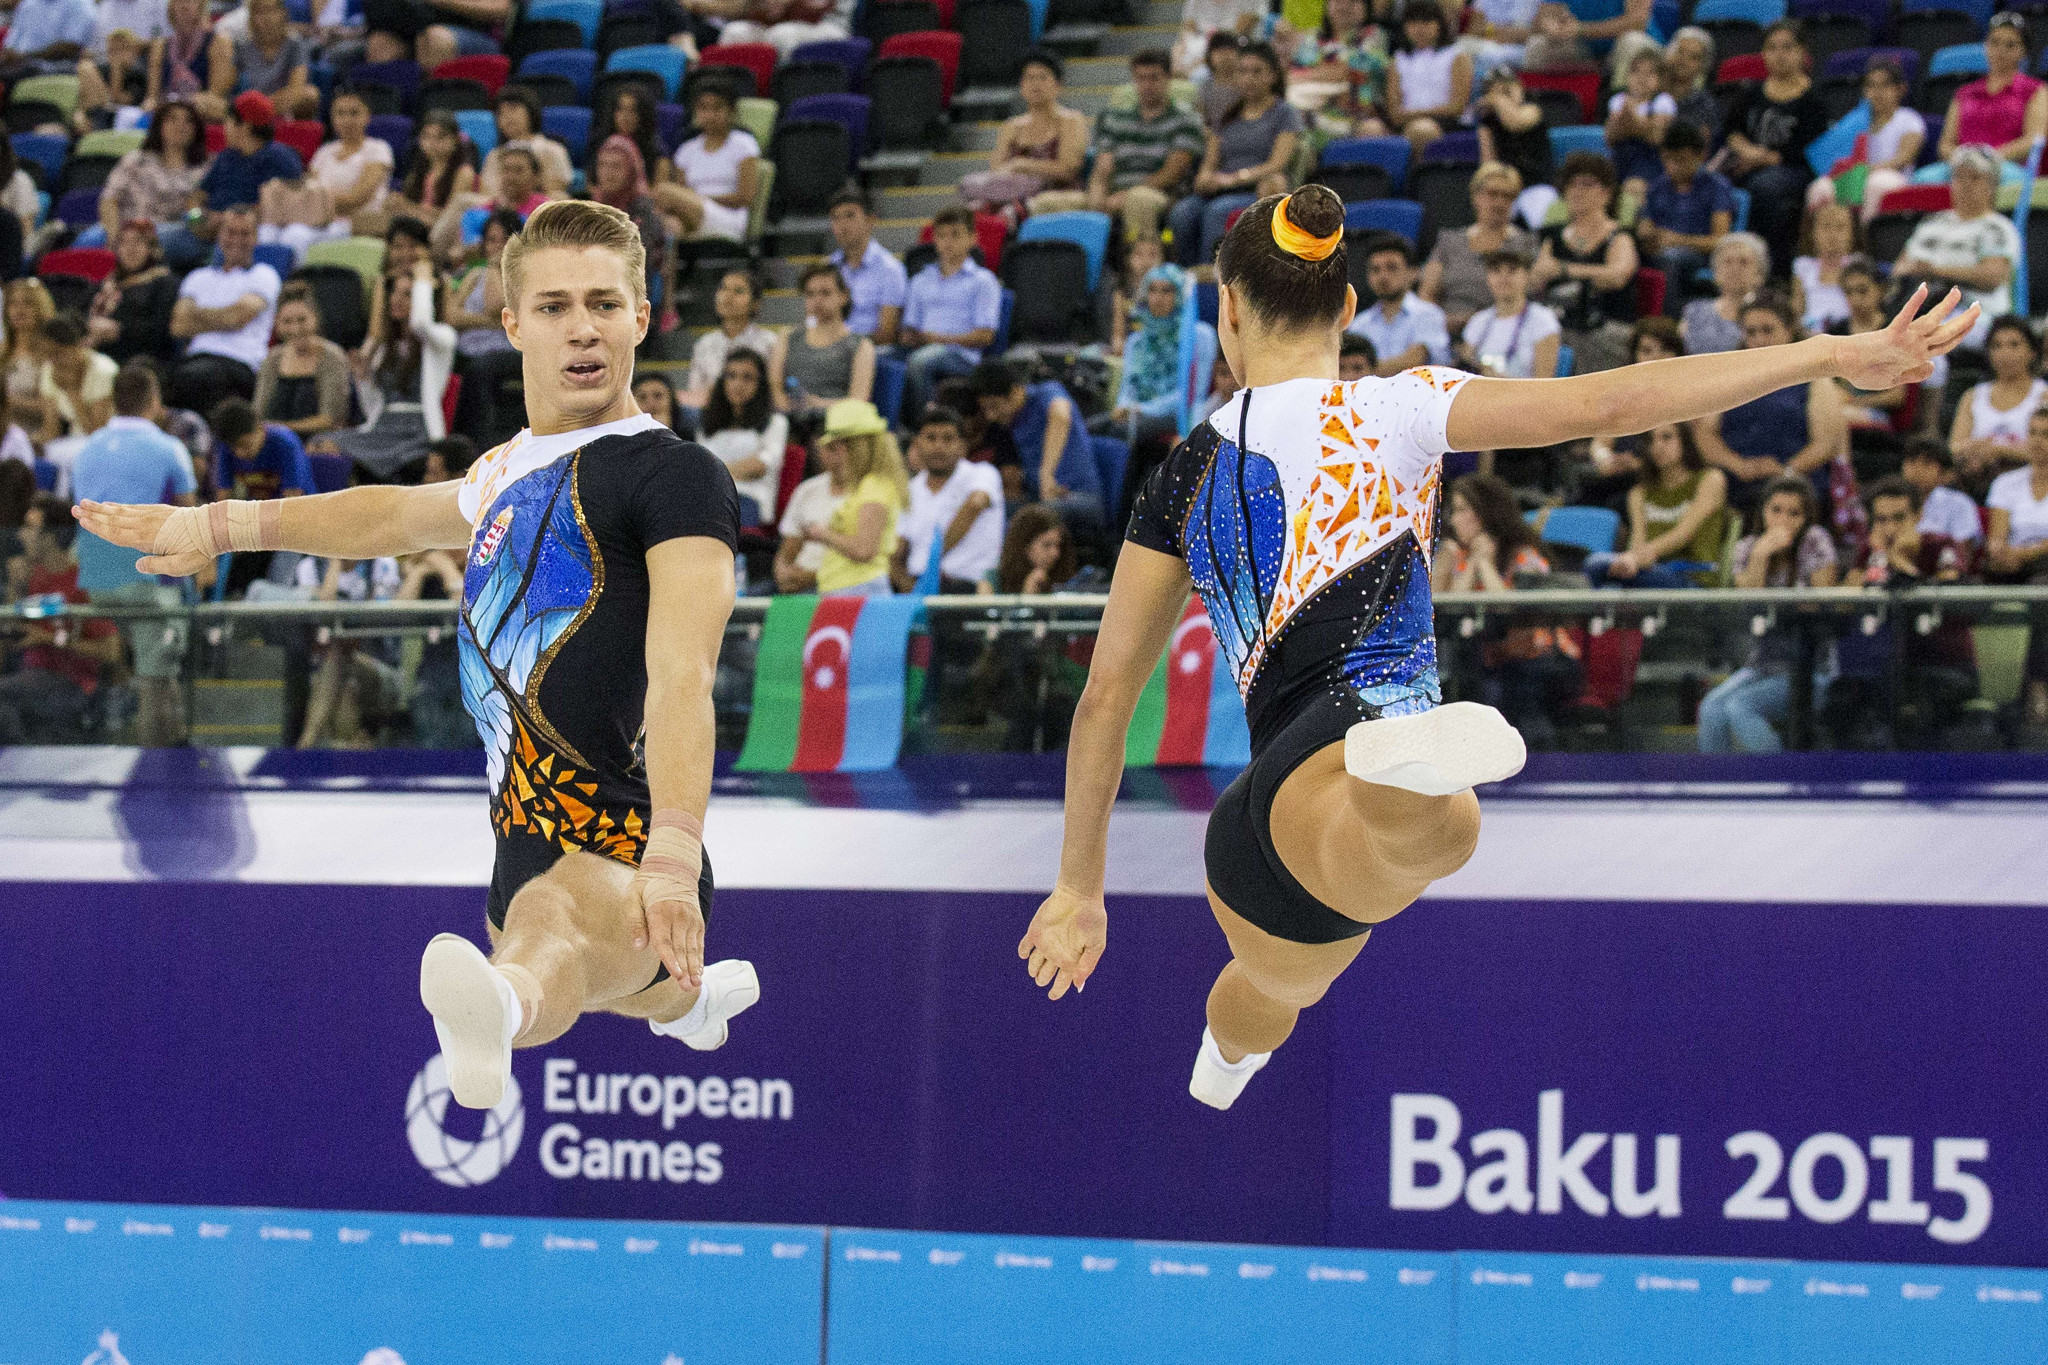 Hungary's Daniel Bali, left, competing in the mixed pair, will be seeking to add to his collection of gold medals at this weekend's Aerobic Gymnastics European Championships in Baku ©Getty Images